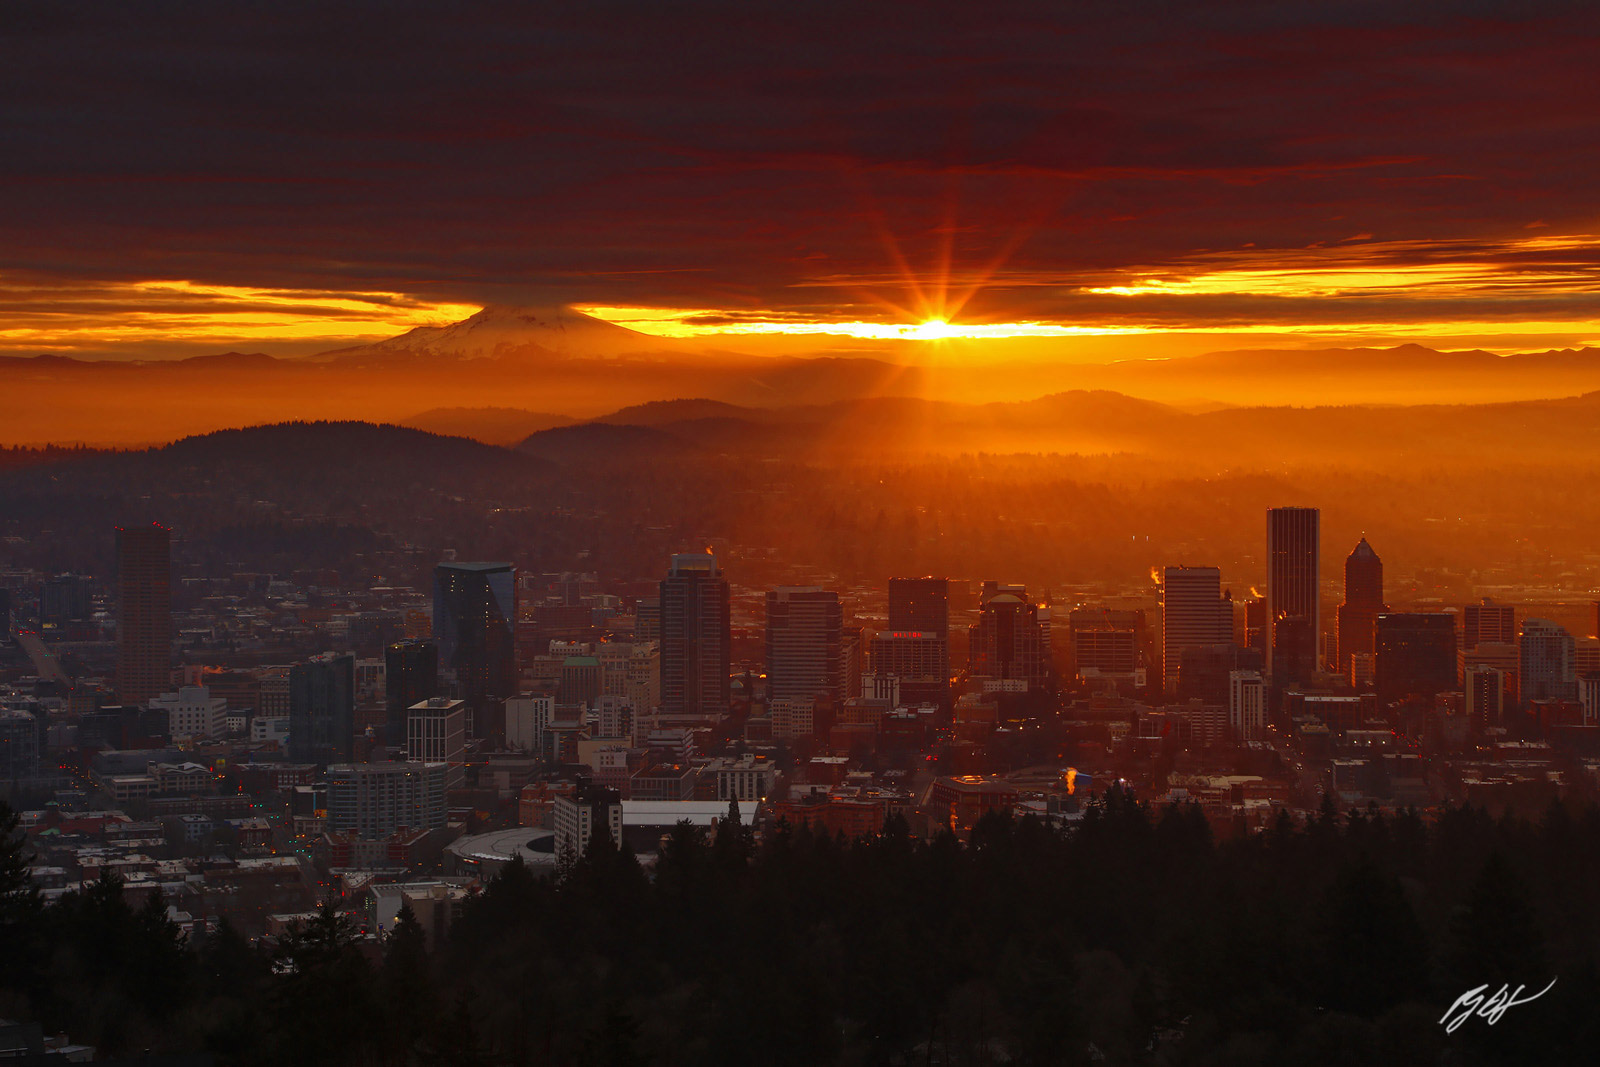 Sunrise and Sunstar over Portland and Mt Hood from the Pittock Mansion in Portland, Oregon